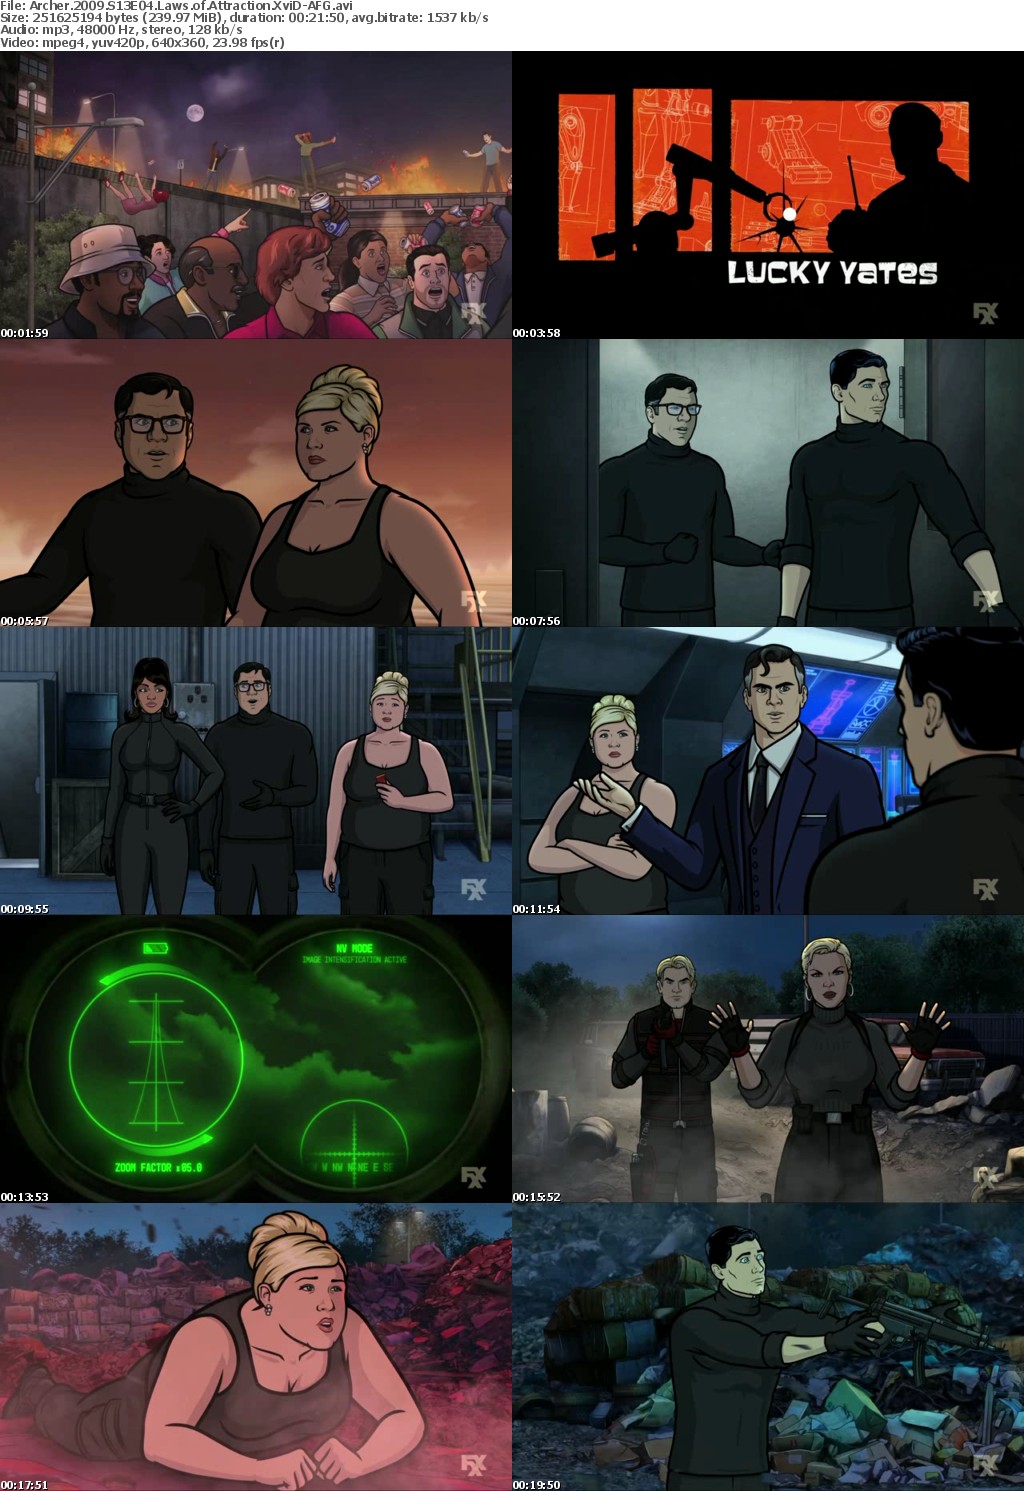 Archer 2009 S13E04 Laws of Attraction XviD-AFG